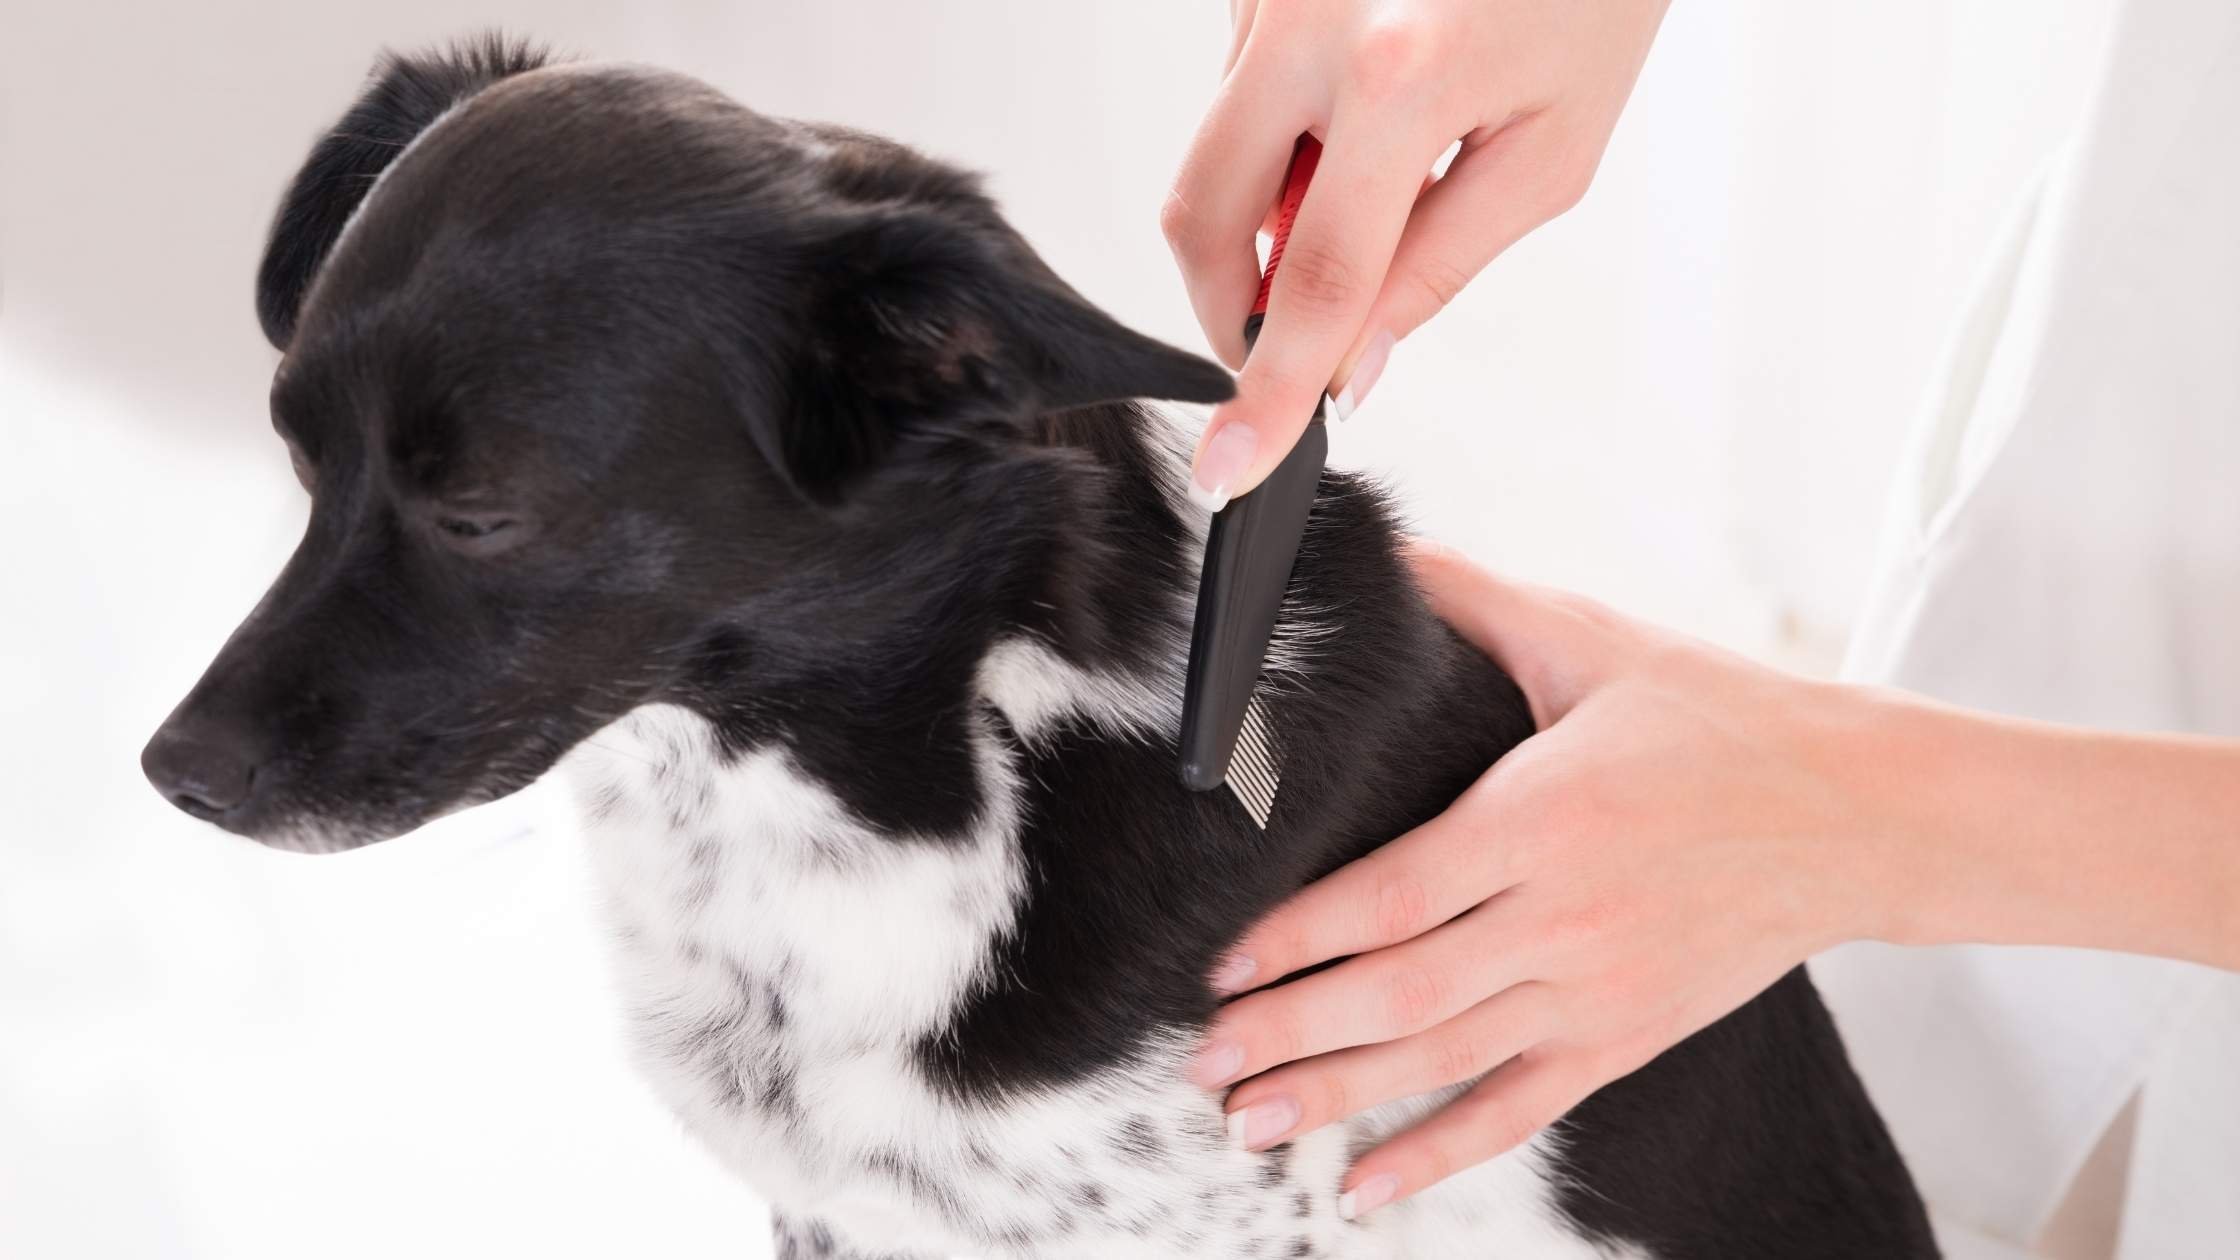 How Often Should You Brush Your Dog? Tips Based on Your Pet's Coat